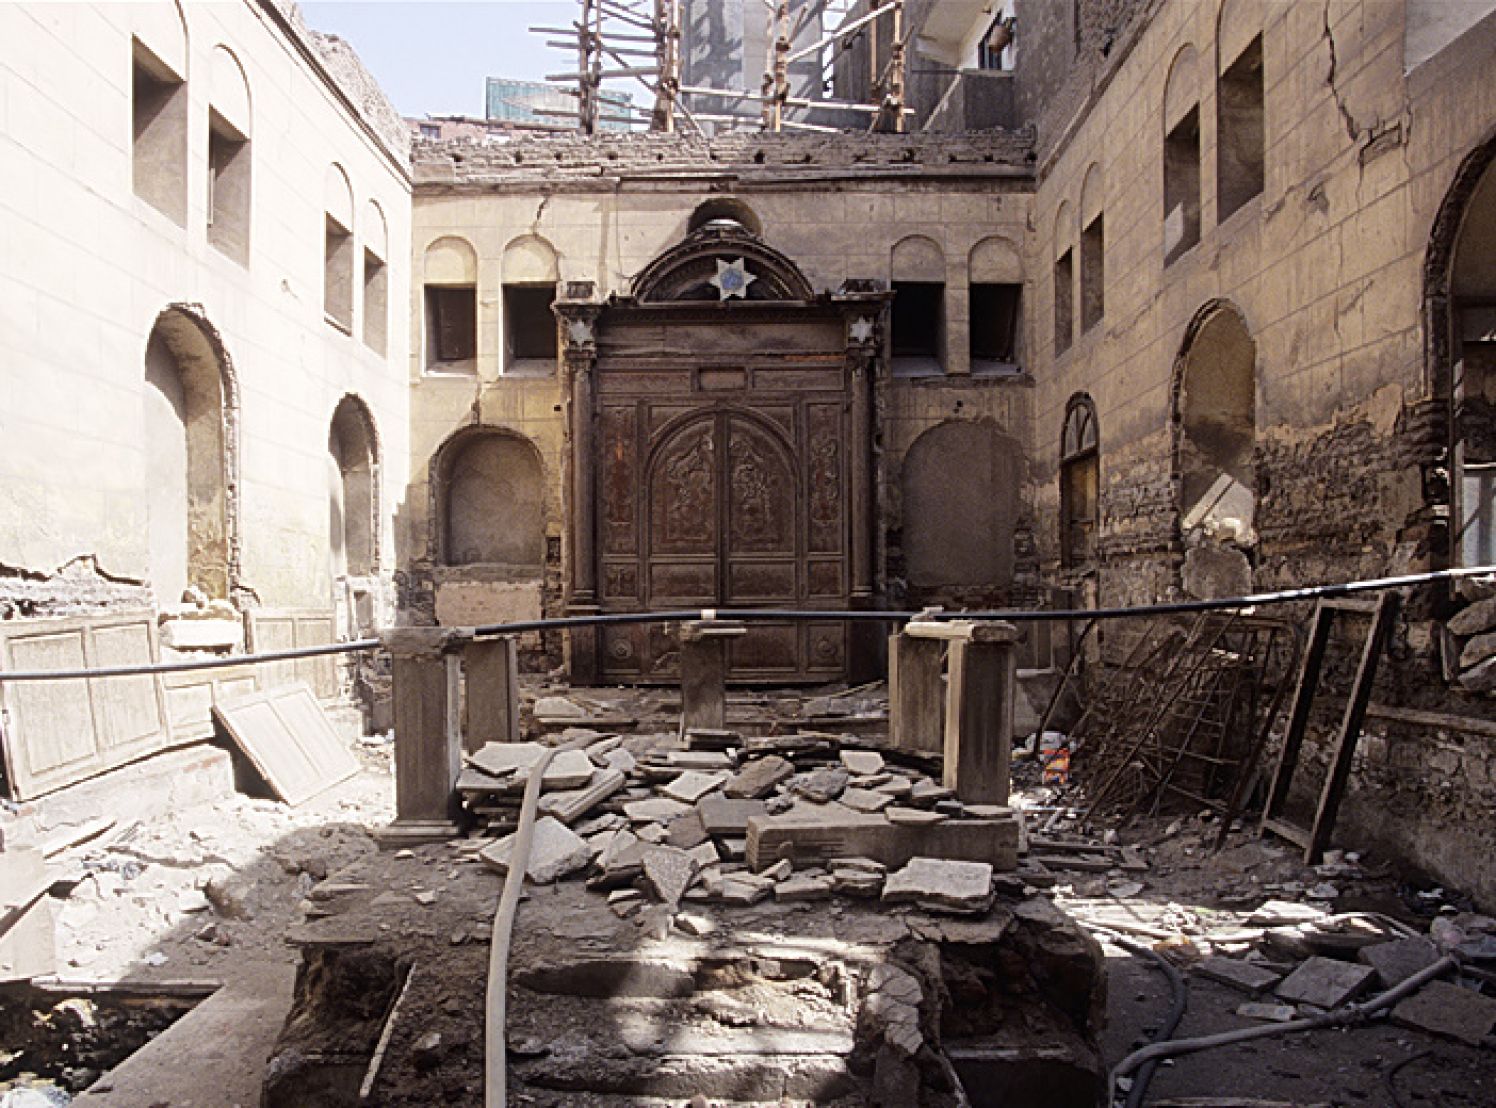 Cairo's Maimonides Synagogue in 2006: Finally, Egypt is 'rid' of its JewsRoland Unger, Wikimedia